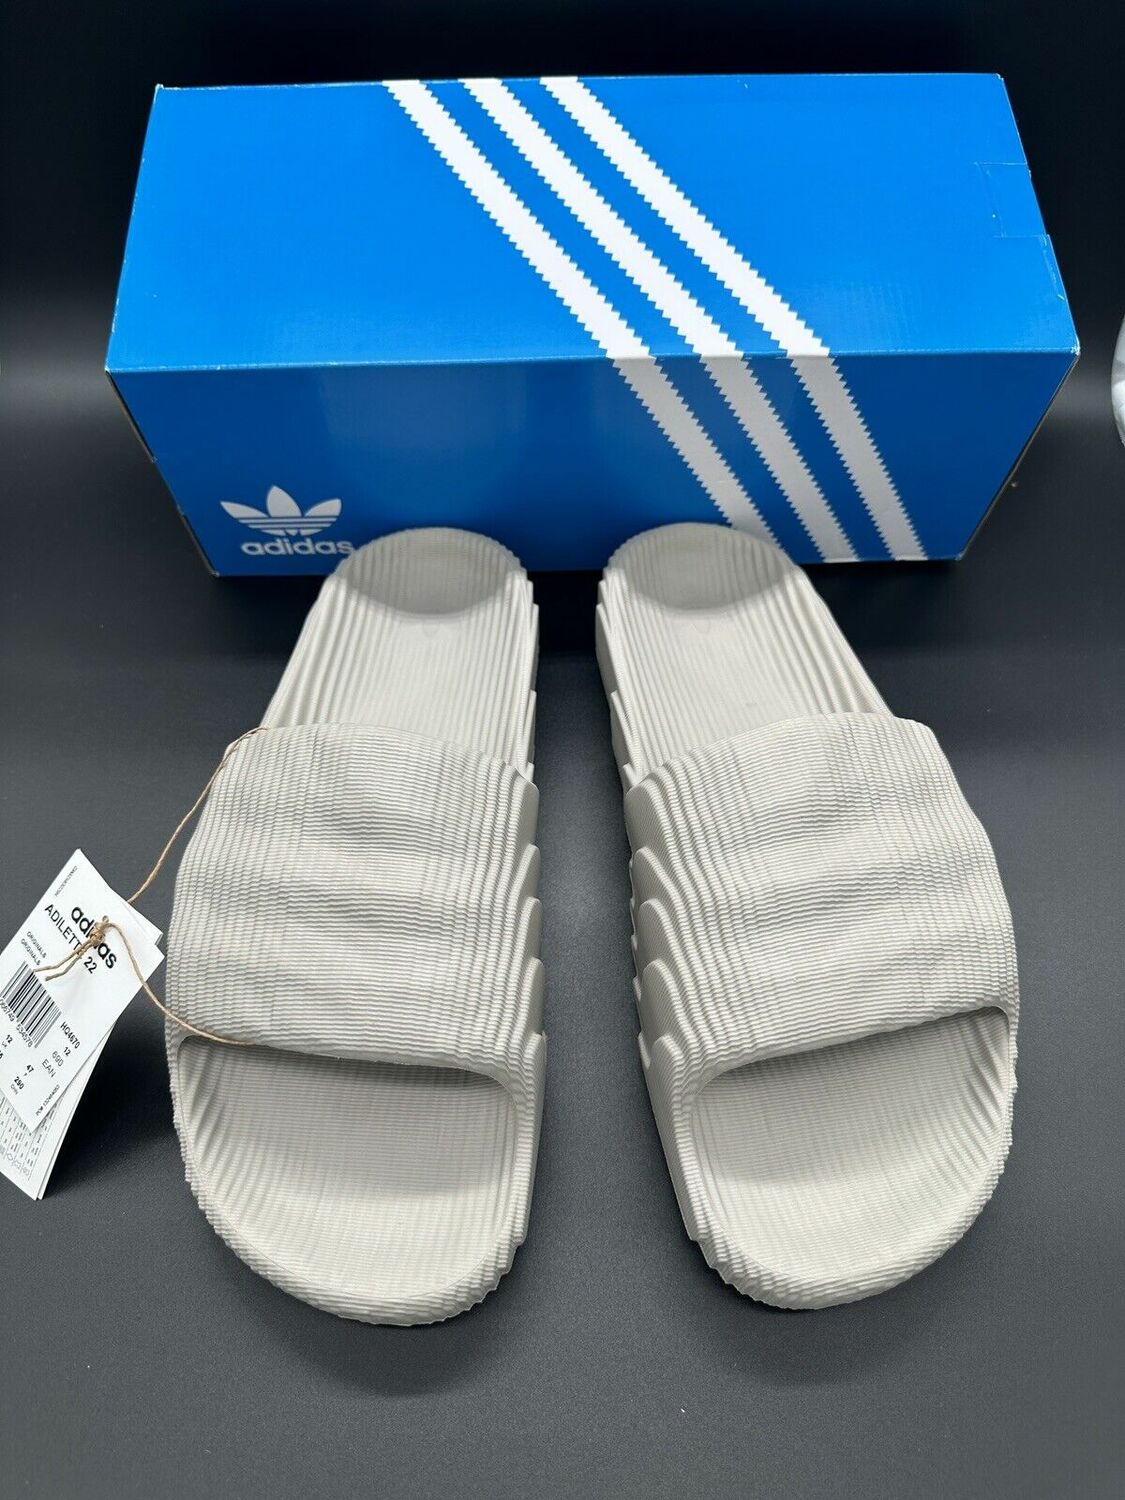 <span style="font-weight: bold;">ADIDAS SLIDES</span><br>